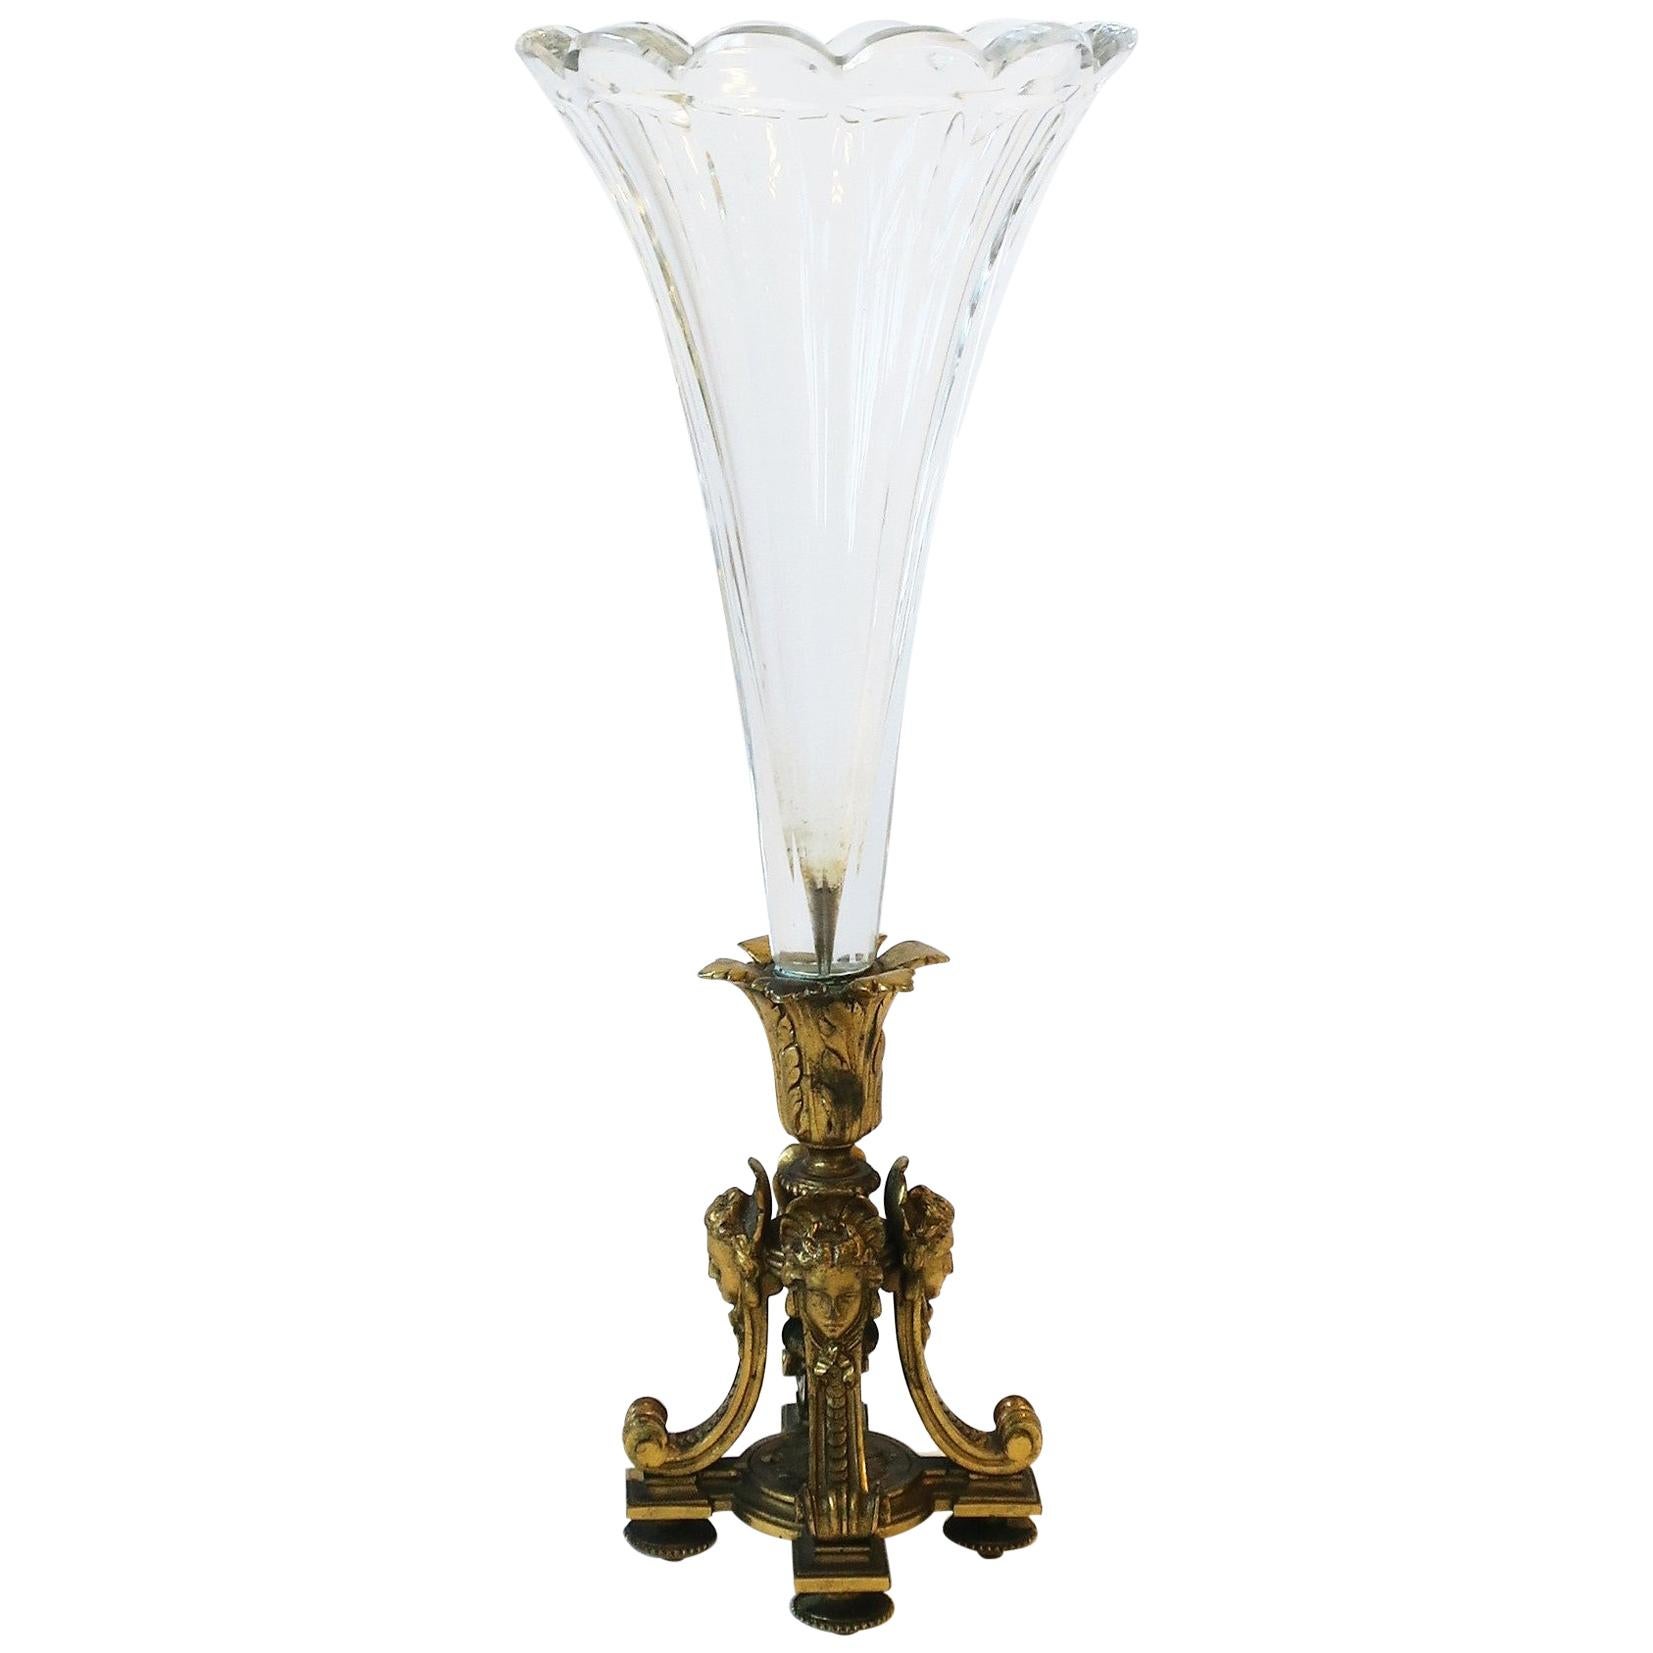 A very beautiful and substantial French Empire gold gilt bronze and crystal vase, circa late 19th century, France. Both crystal and gilt bronze are substantial; crystal has a beautiful scalloped edge and gilt bronze base extremely detailed.